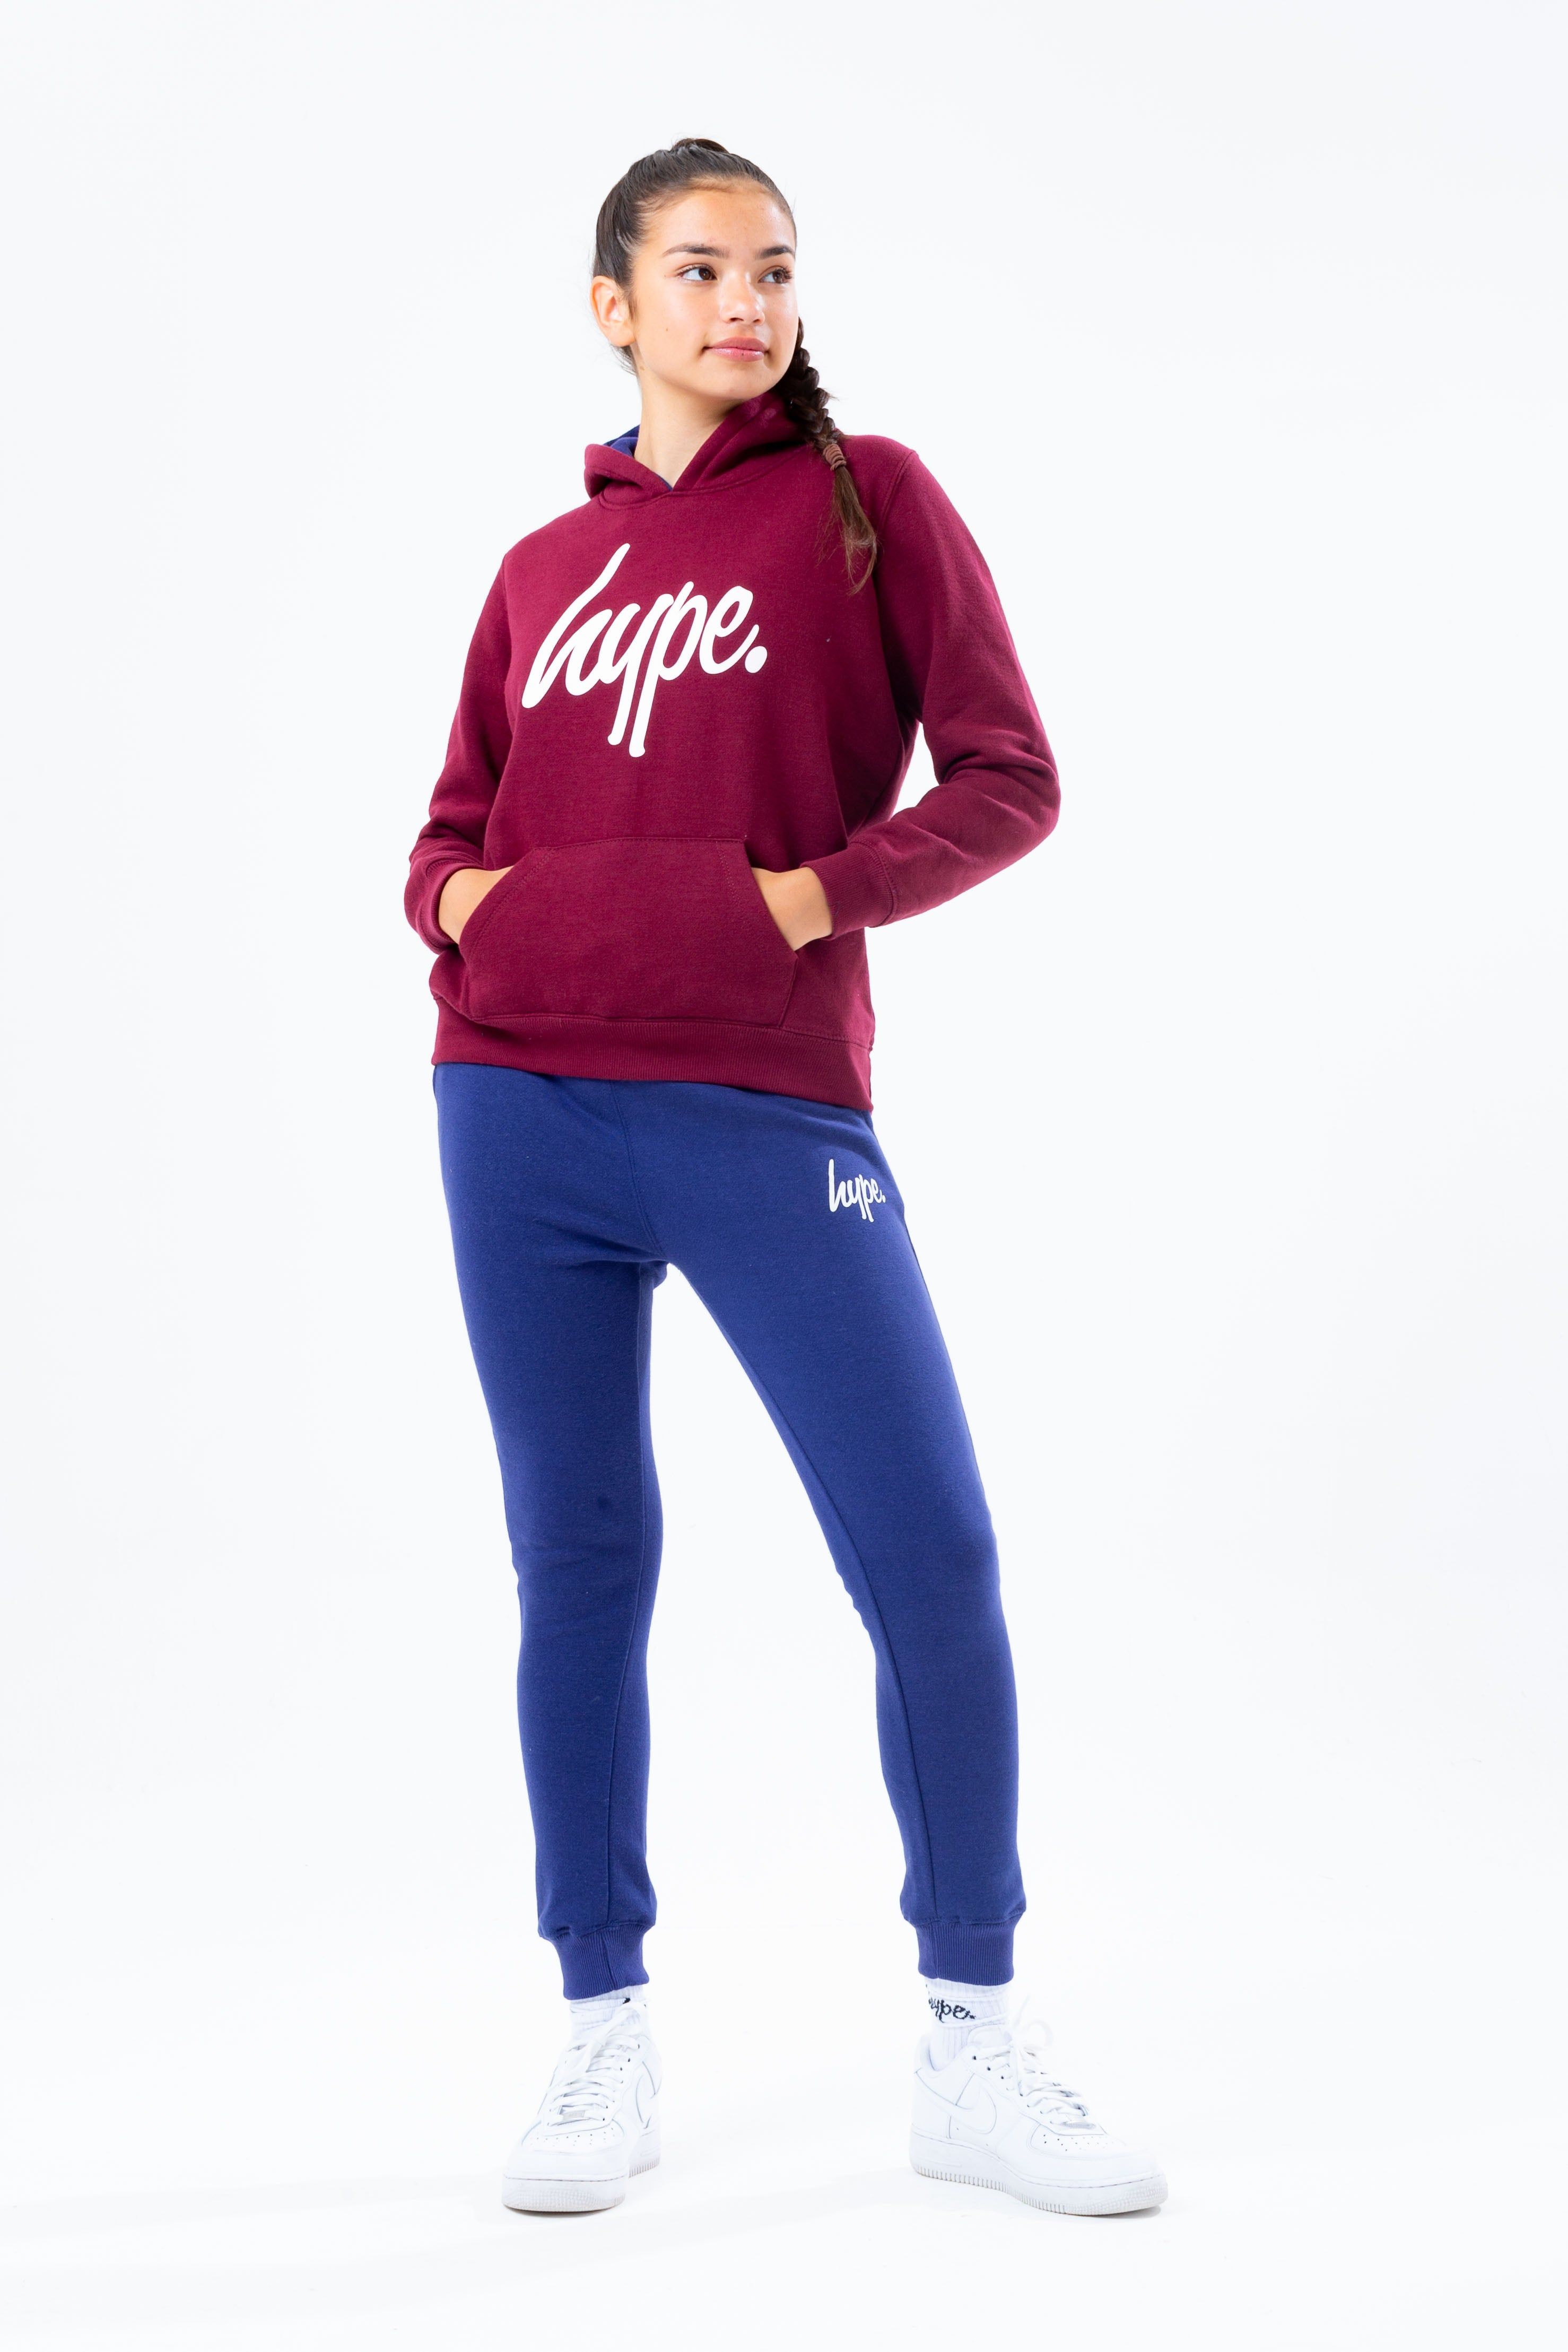 The HYPE. burgundy hoodie navy jogger kids set is perfect for off-duty casual days. Designed in a burgundy and navy fabric base with the ultimate soft-touch sweat fabric for supreme comfort. The kids hoodie highlights a fixed hood, fitted hem and cuffs, finished with the iconic HYPE. script logo  across the front. The joggers boast an elasticated waistband and fitted cuffs with the HYPE. mini script logo. Wear stand alone or as a set with a pair of box fresh kicks to complete the look. Machine wash at 30 degrees.